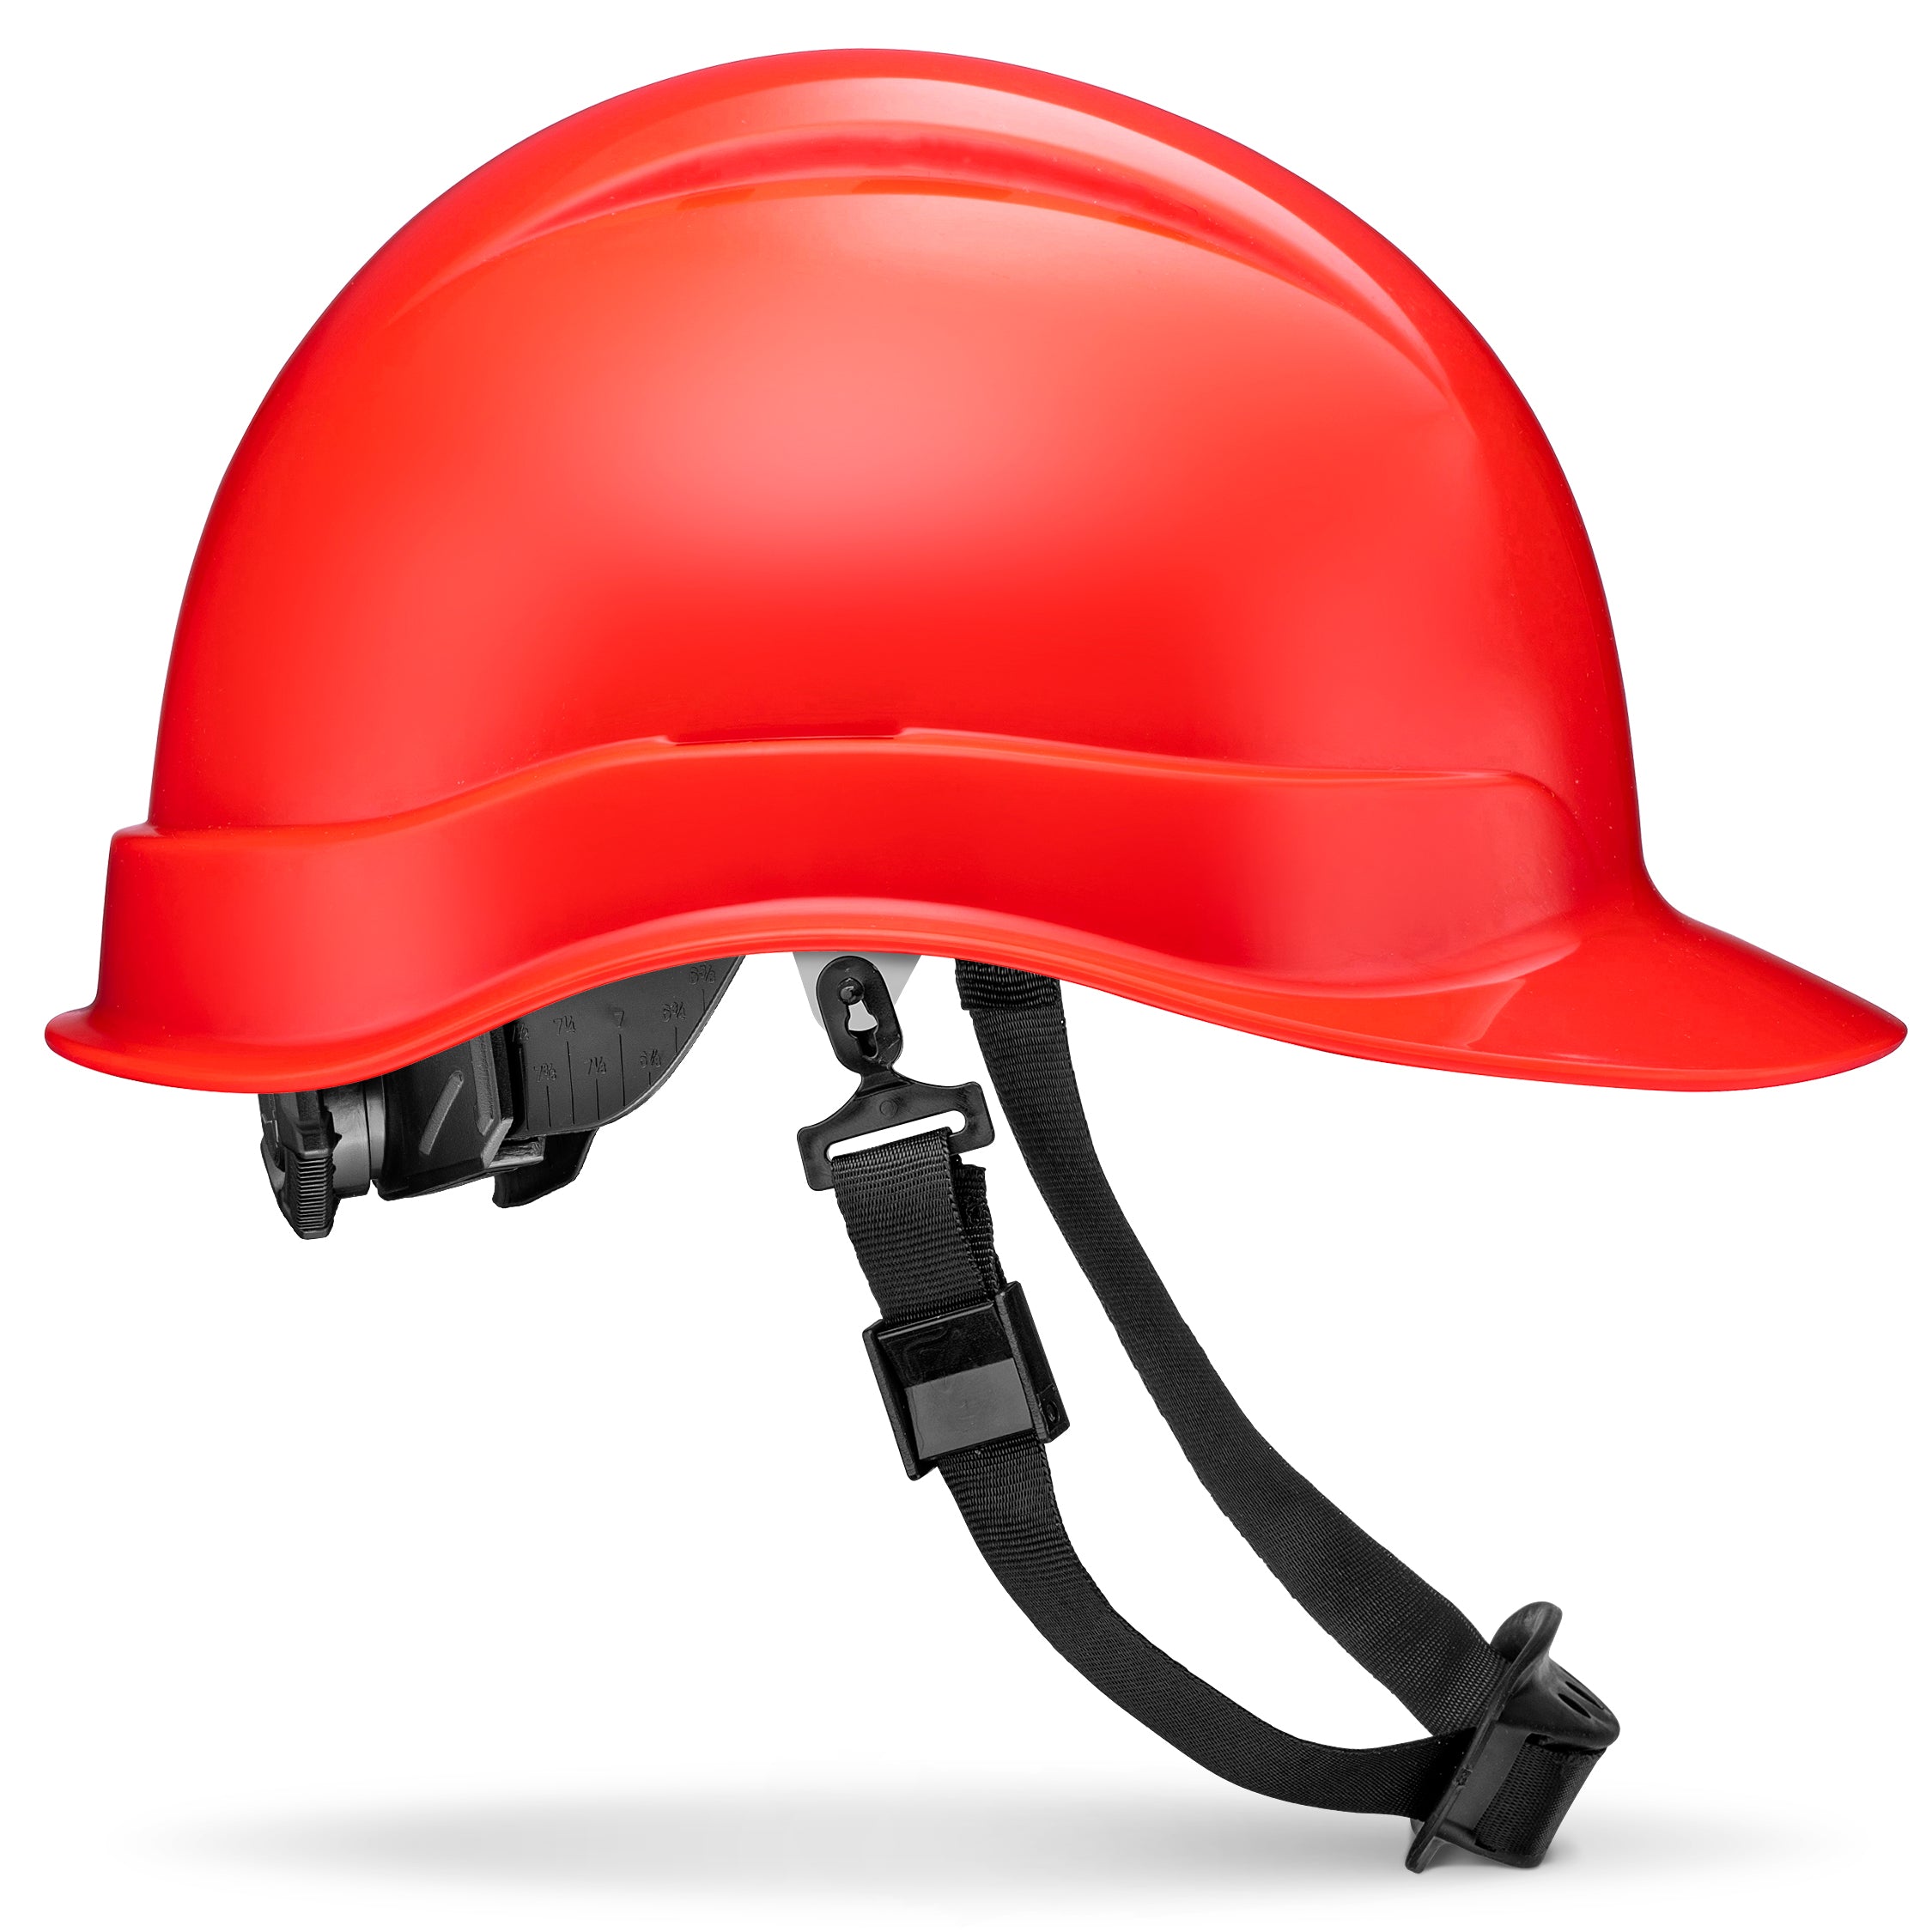 Hard Hats Electrician Construction Work Safety Helmet Cap Style ANSI Z89.1  Approved OSHA Hardhat Men Electrical Worker Hard Hat with Chin Strap Type I